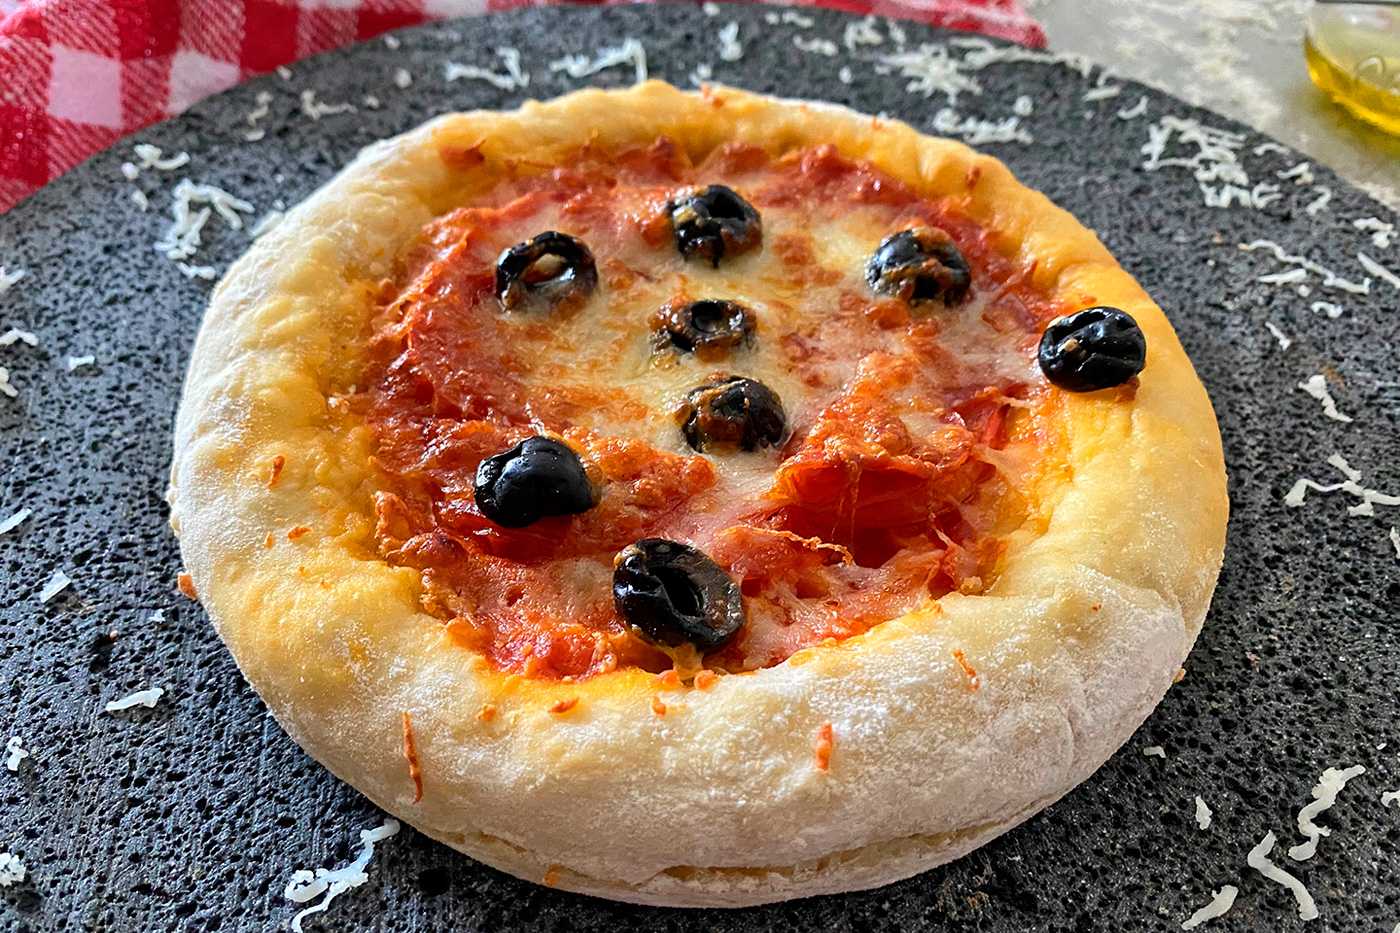 Small pizza with mozzarella cheese and tomato sauce topped with black olives on black plate